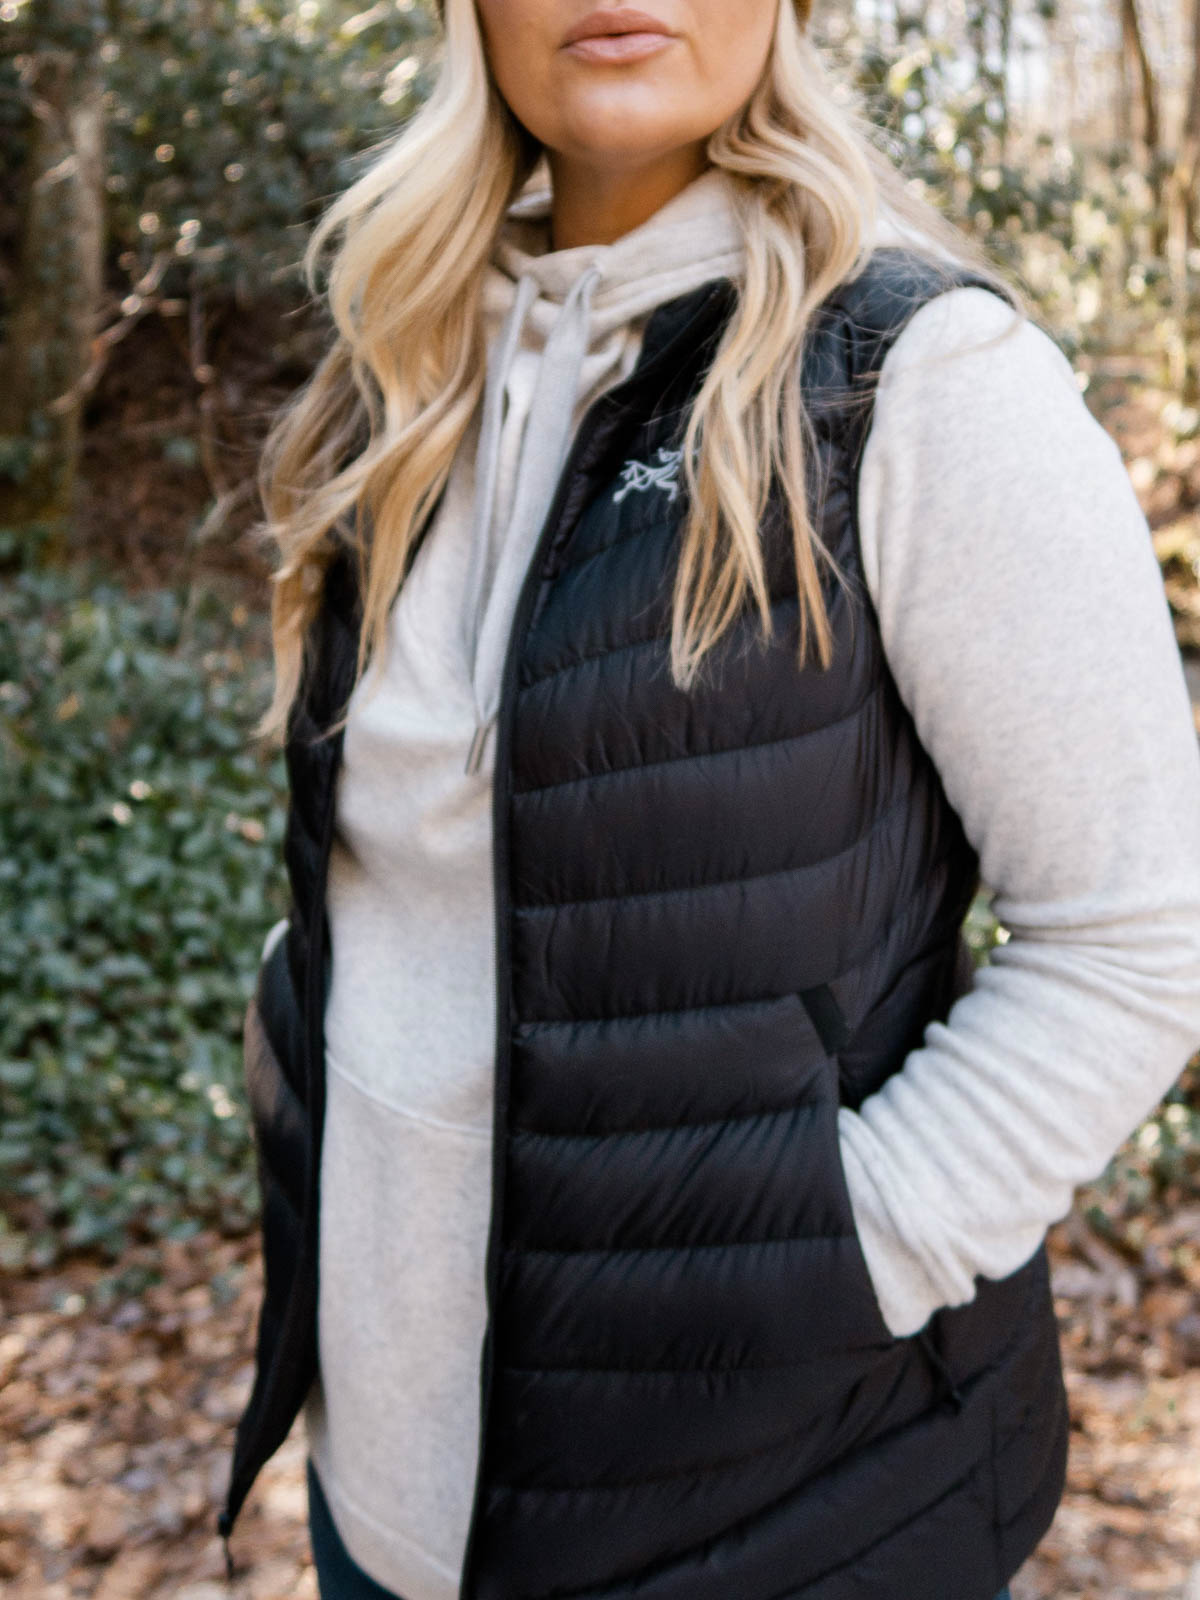 Cristin Cooper in the Arc'teryx Down Vest and Basin and Range Hoodie from Backcountry. 